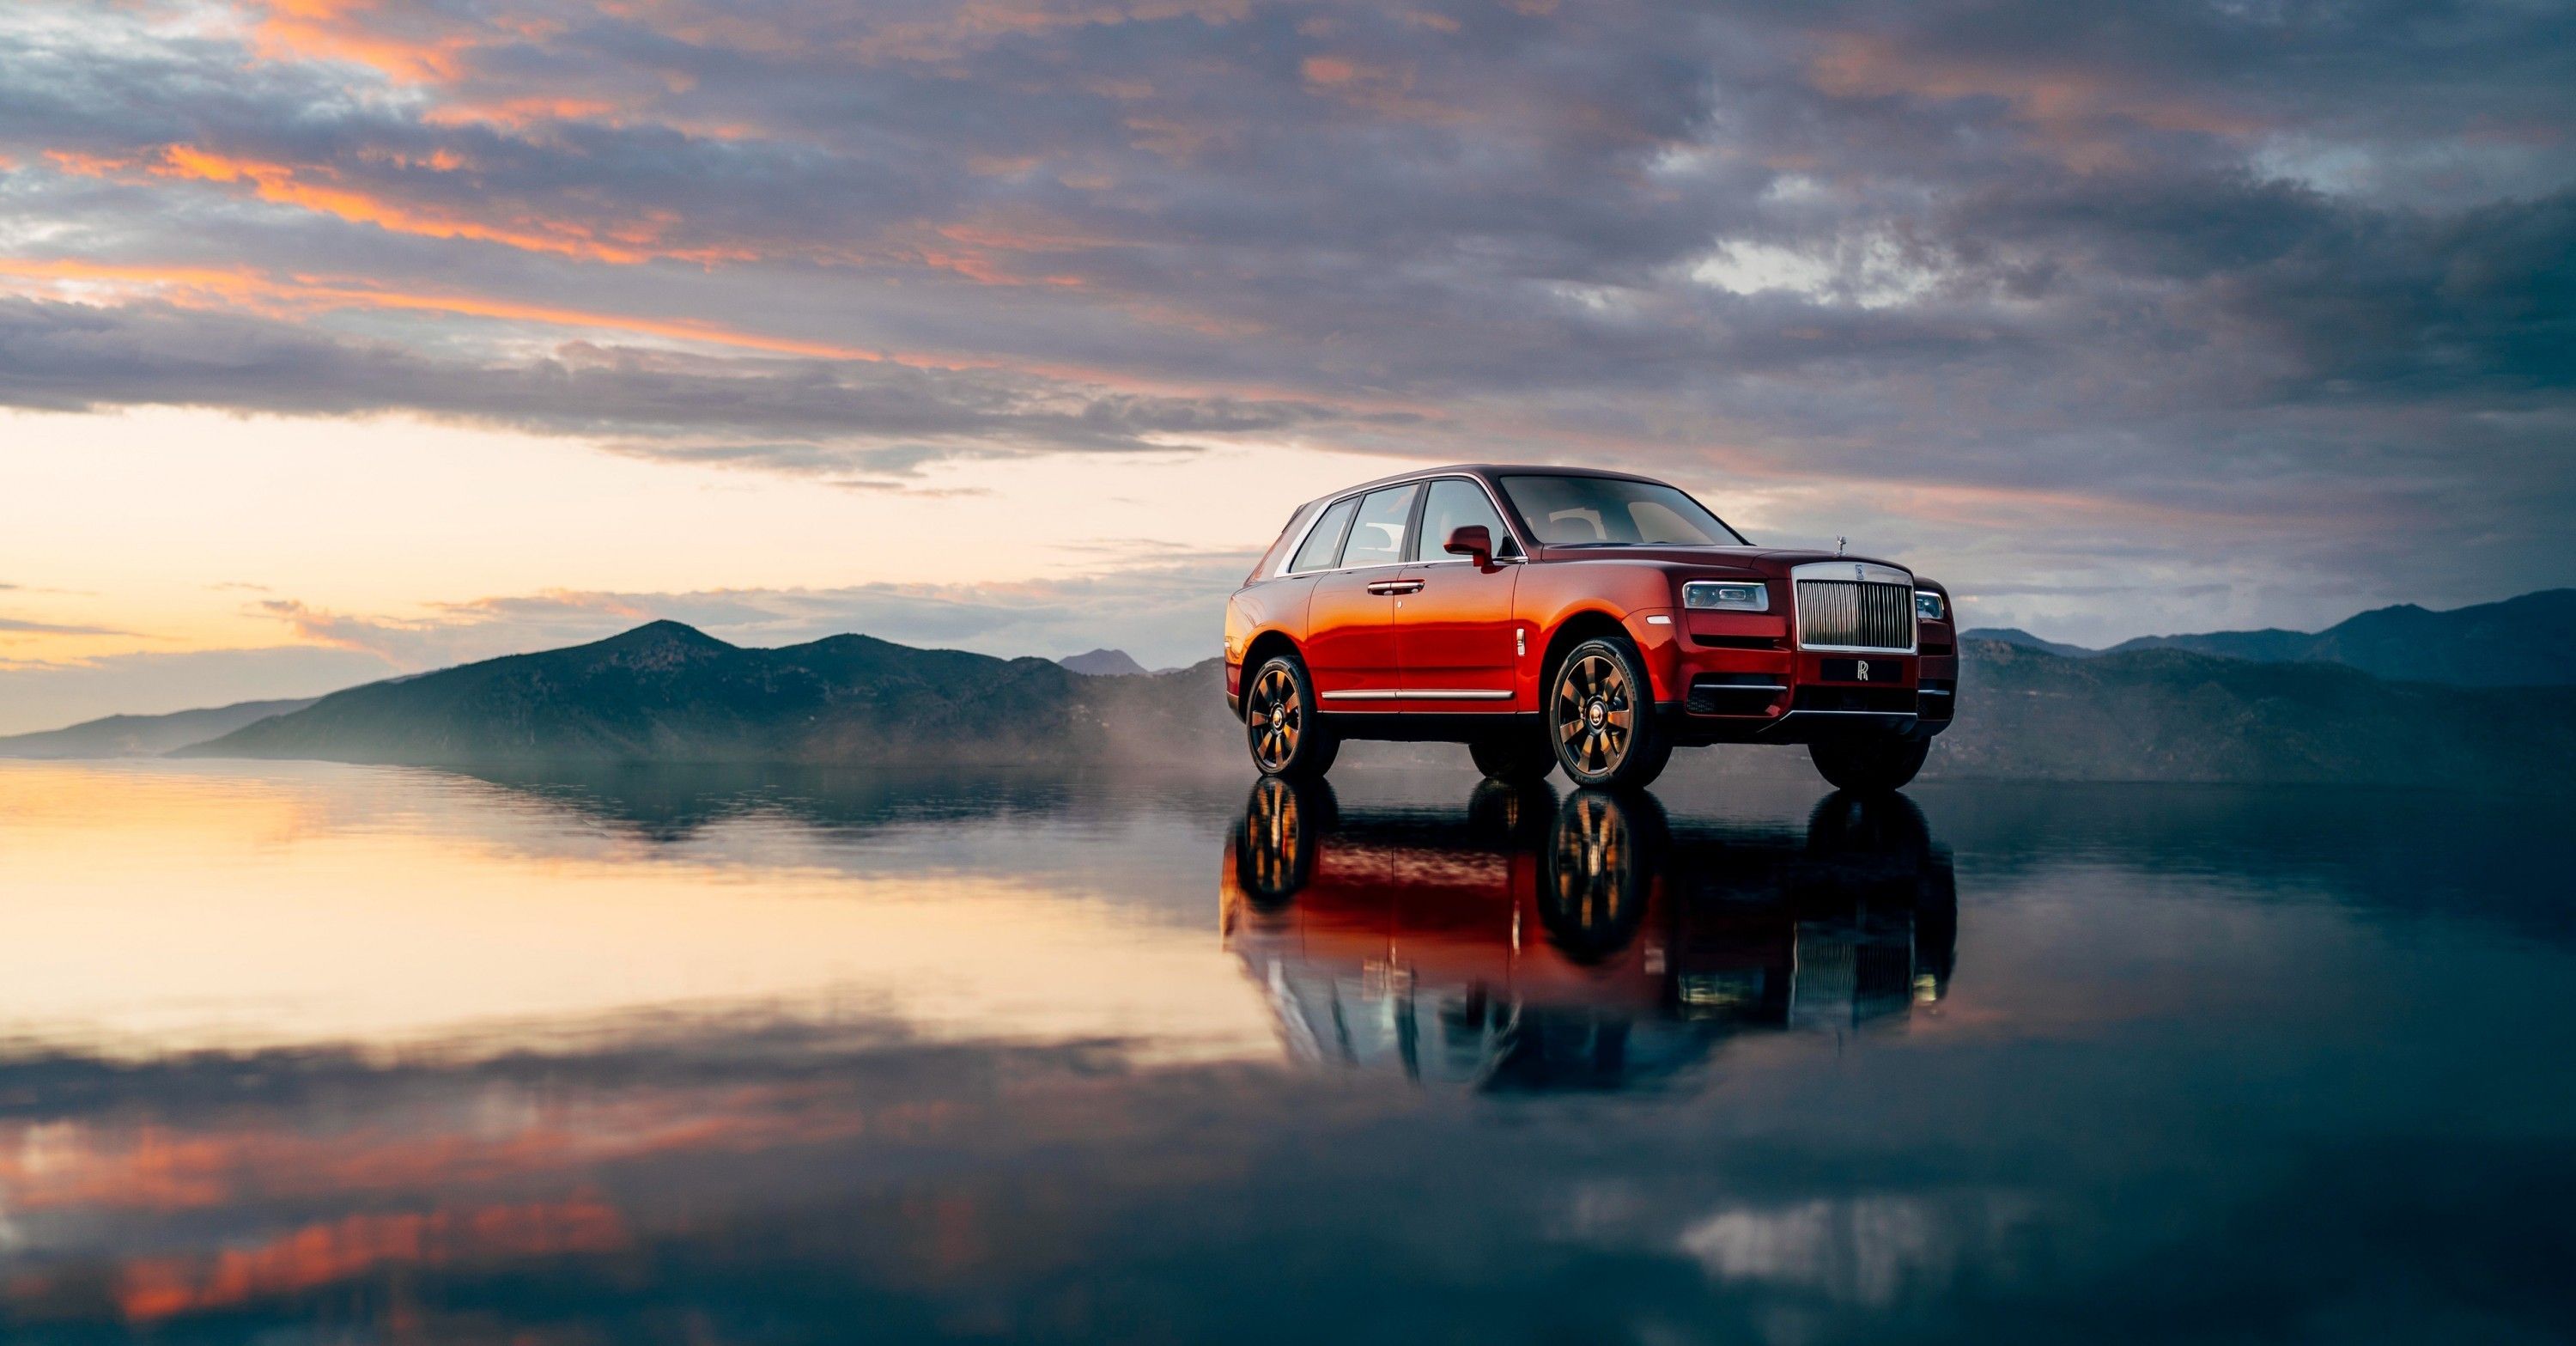 Download 3000x1567 Rolls Royce Cullinan Luxury Suv Cars, Red, Reflection Wallpaper